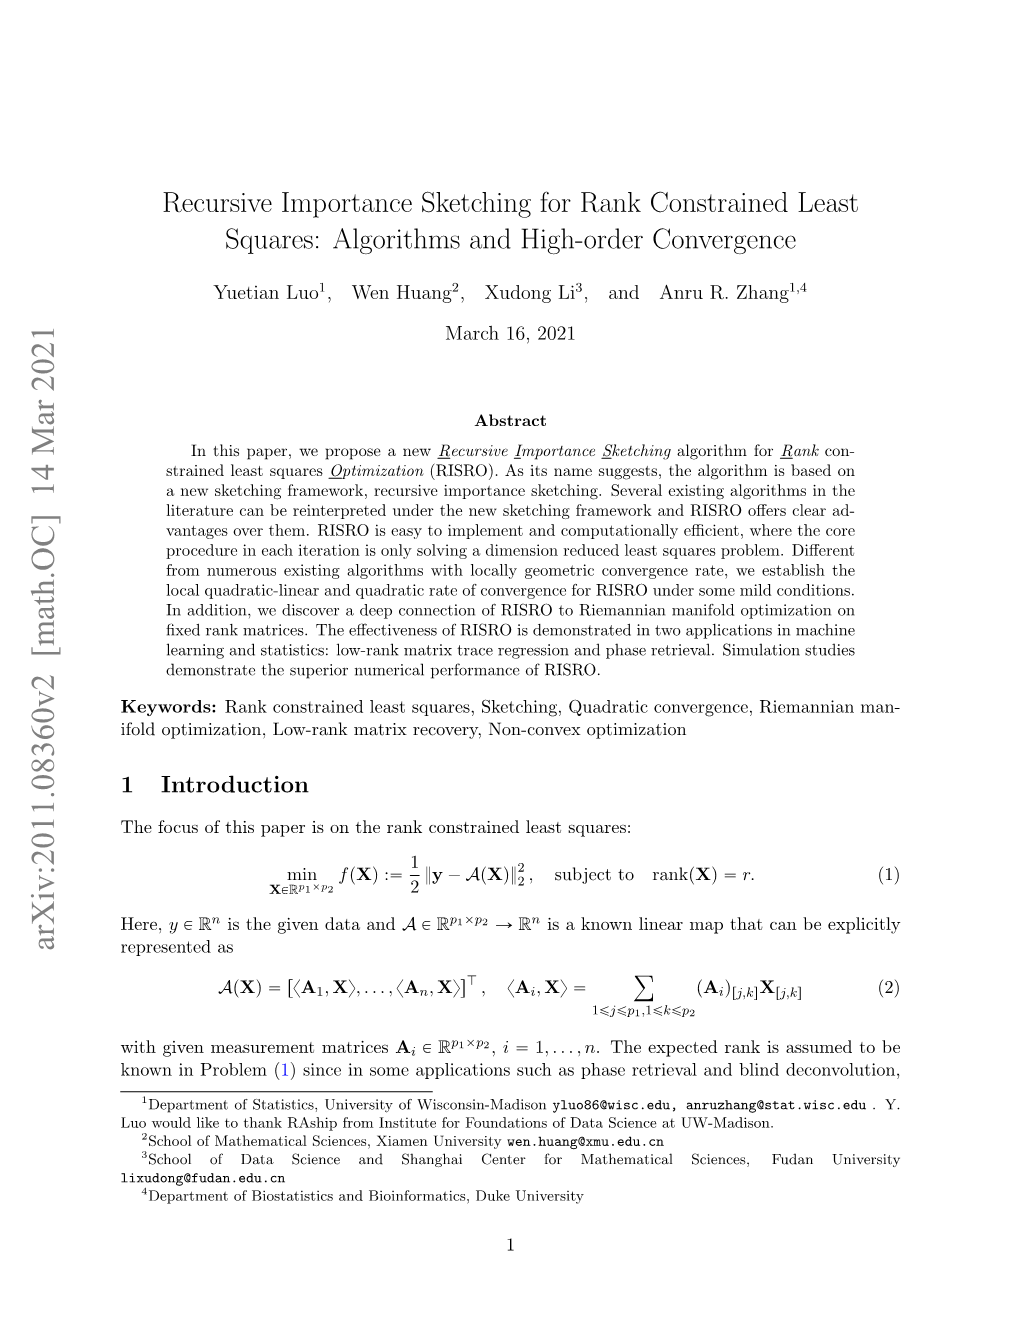 Recursive Importance Sketching for Rank Constrained Least Squares: Algorithms and High-Order Convergence